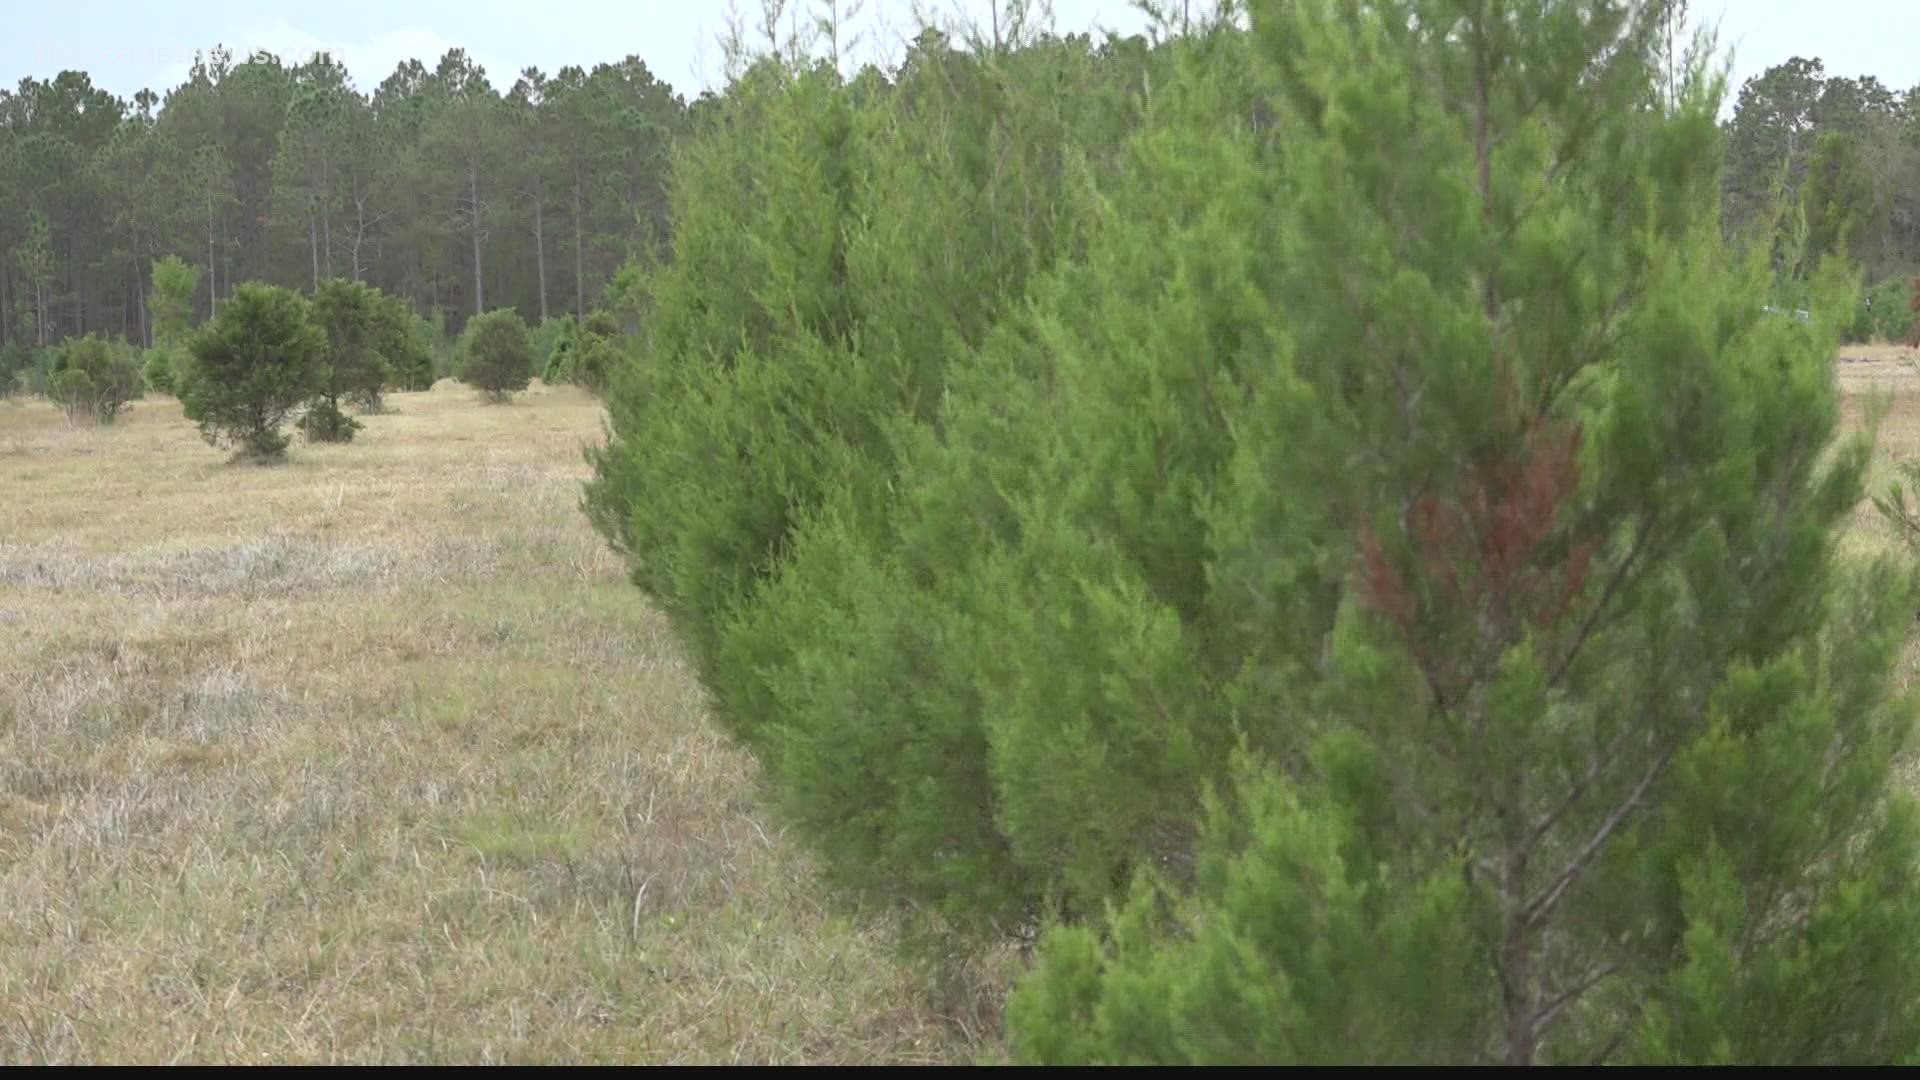 Songer's Christmas Tree Family Farm in Middleburg has been operating for more than 30 years.